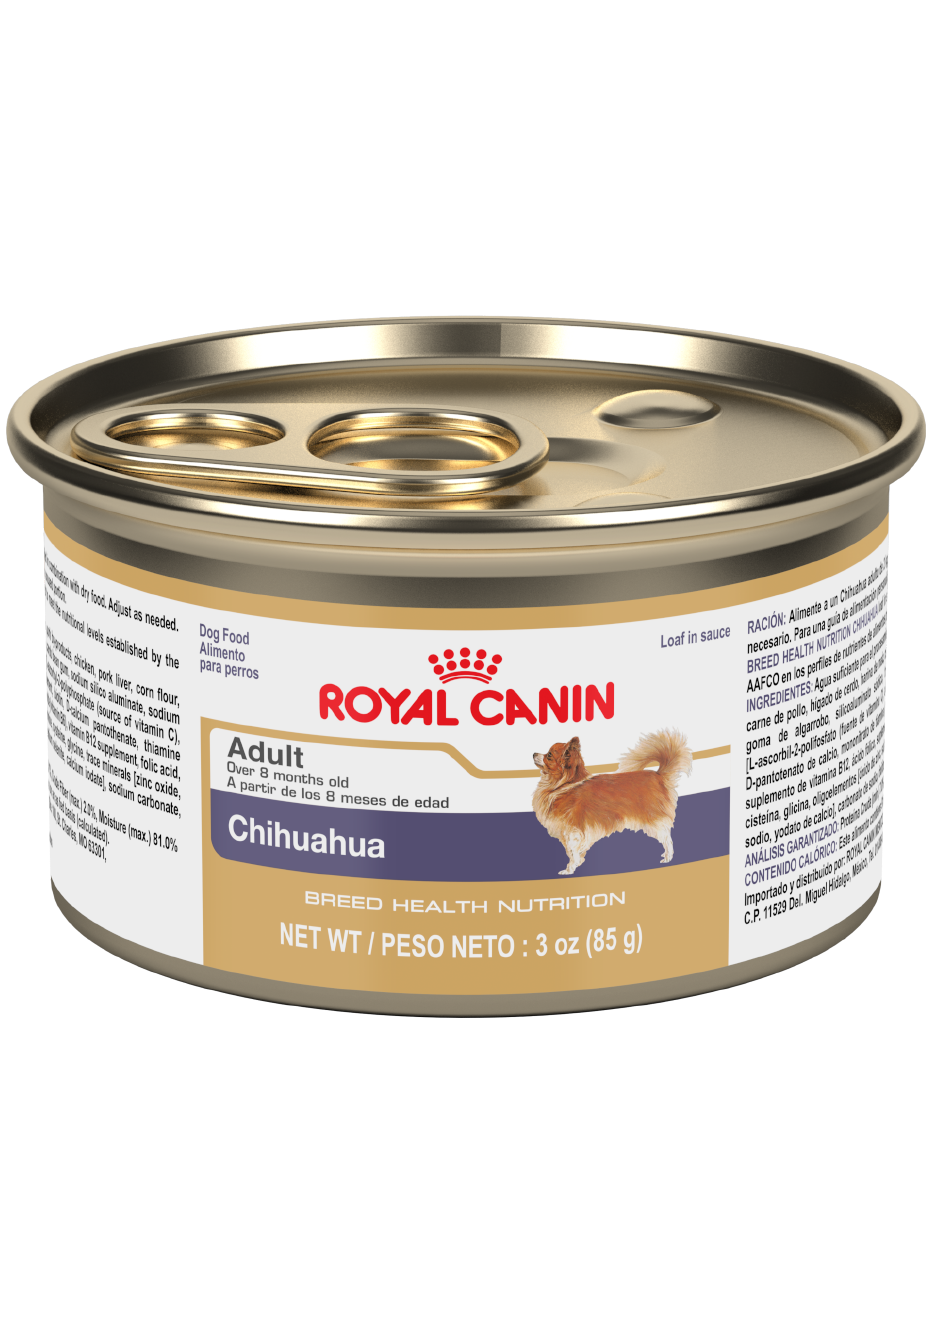 Chihuahua Adult Loaf in Sauce Canned Dog Food